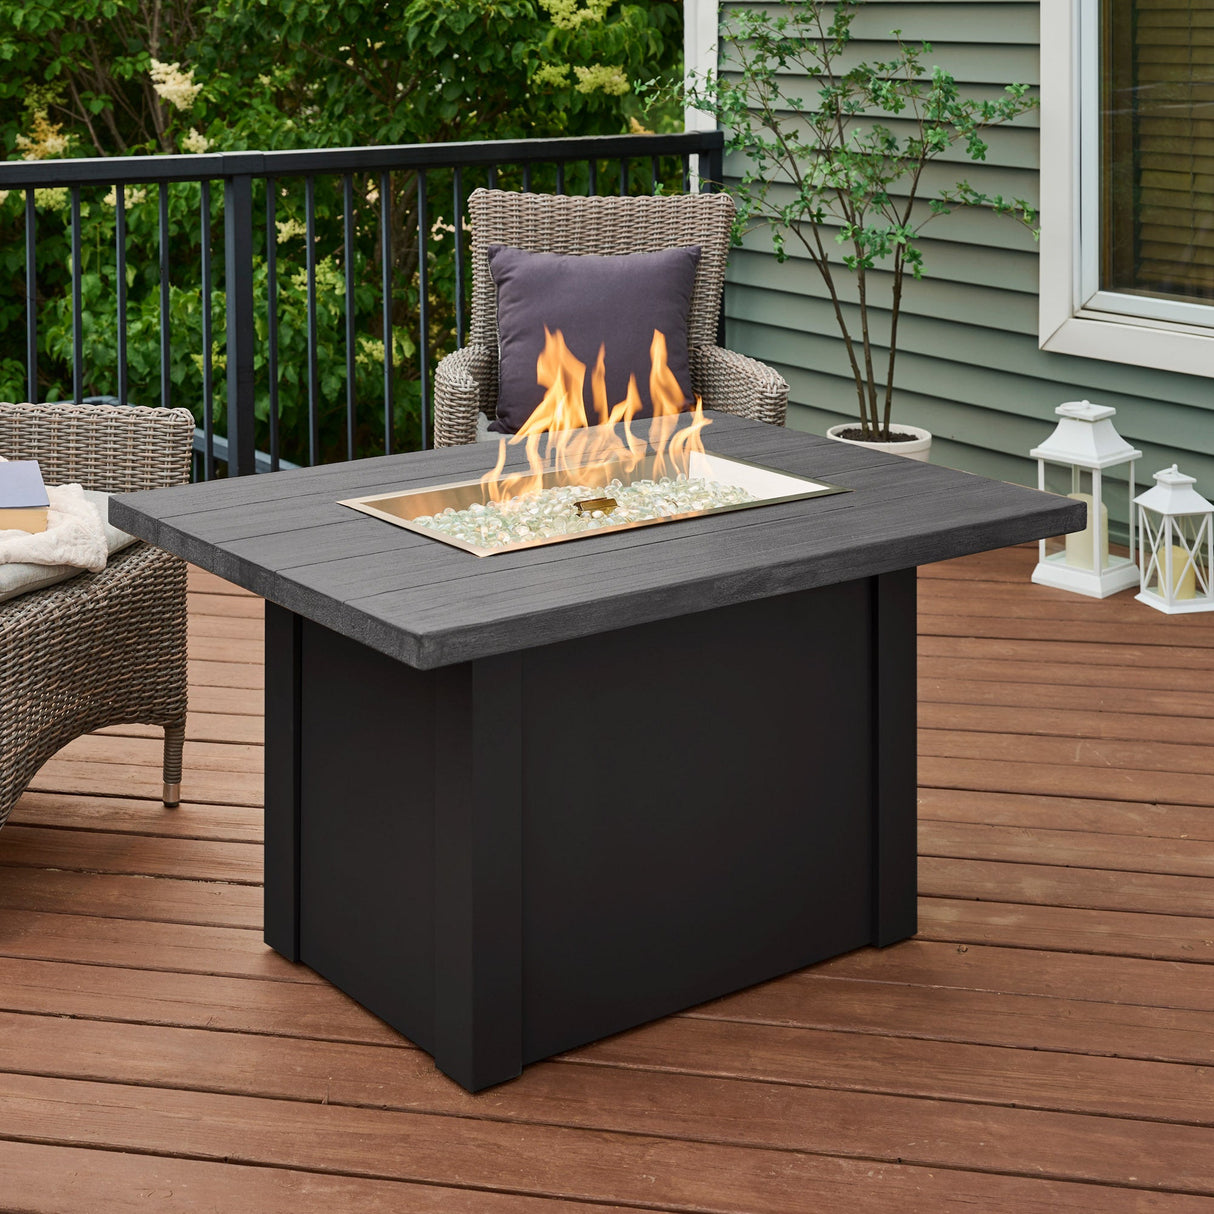 A large flame coming from the burner of a Havenwood Rectangular Gas Fire Pit Table with a Carbon Grey top and Luverne Black base on a patio